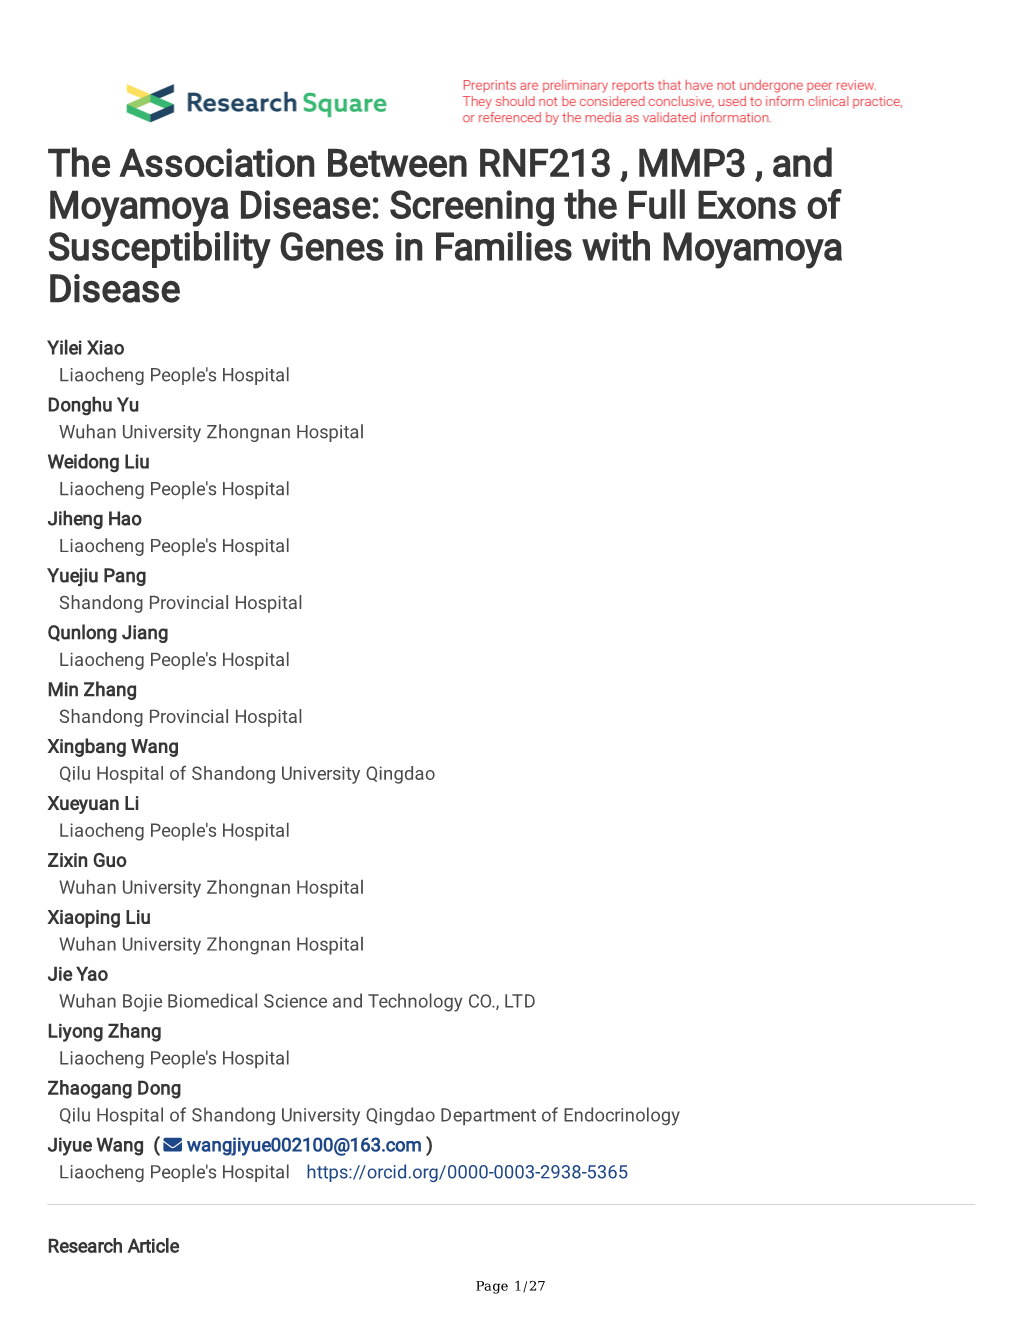 Screening the Full Exons of Susceptibility Genes in Families with Moyamoya Disease